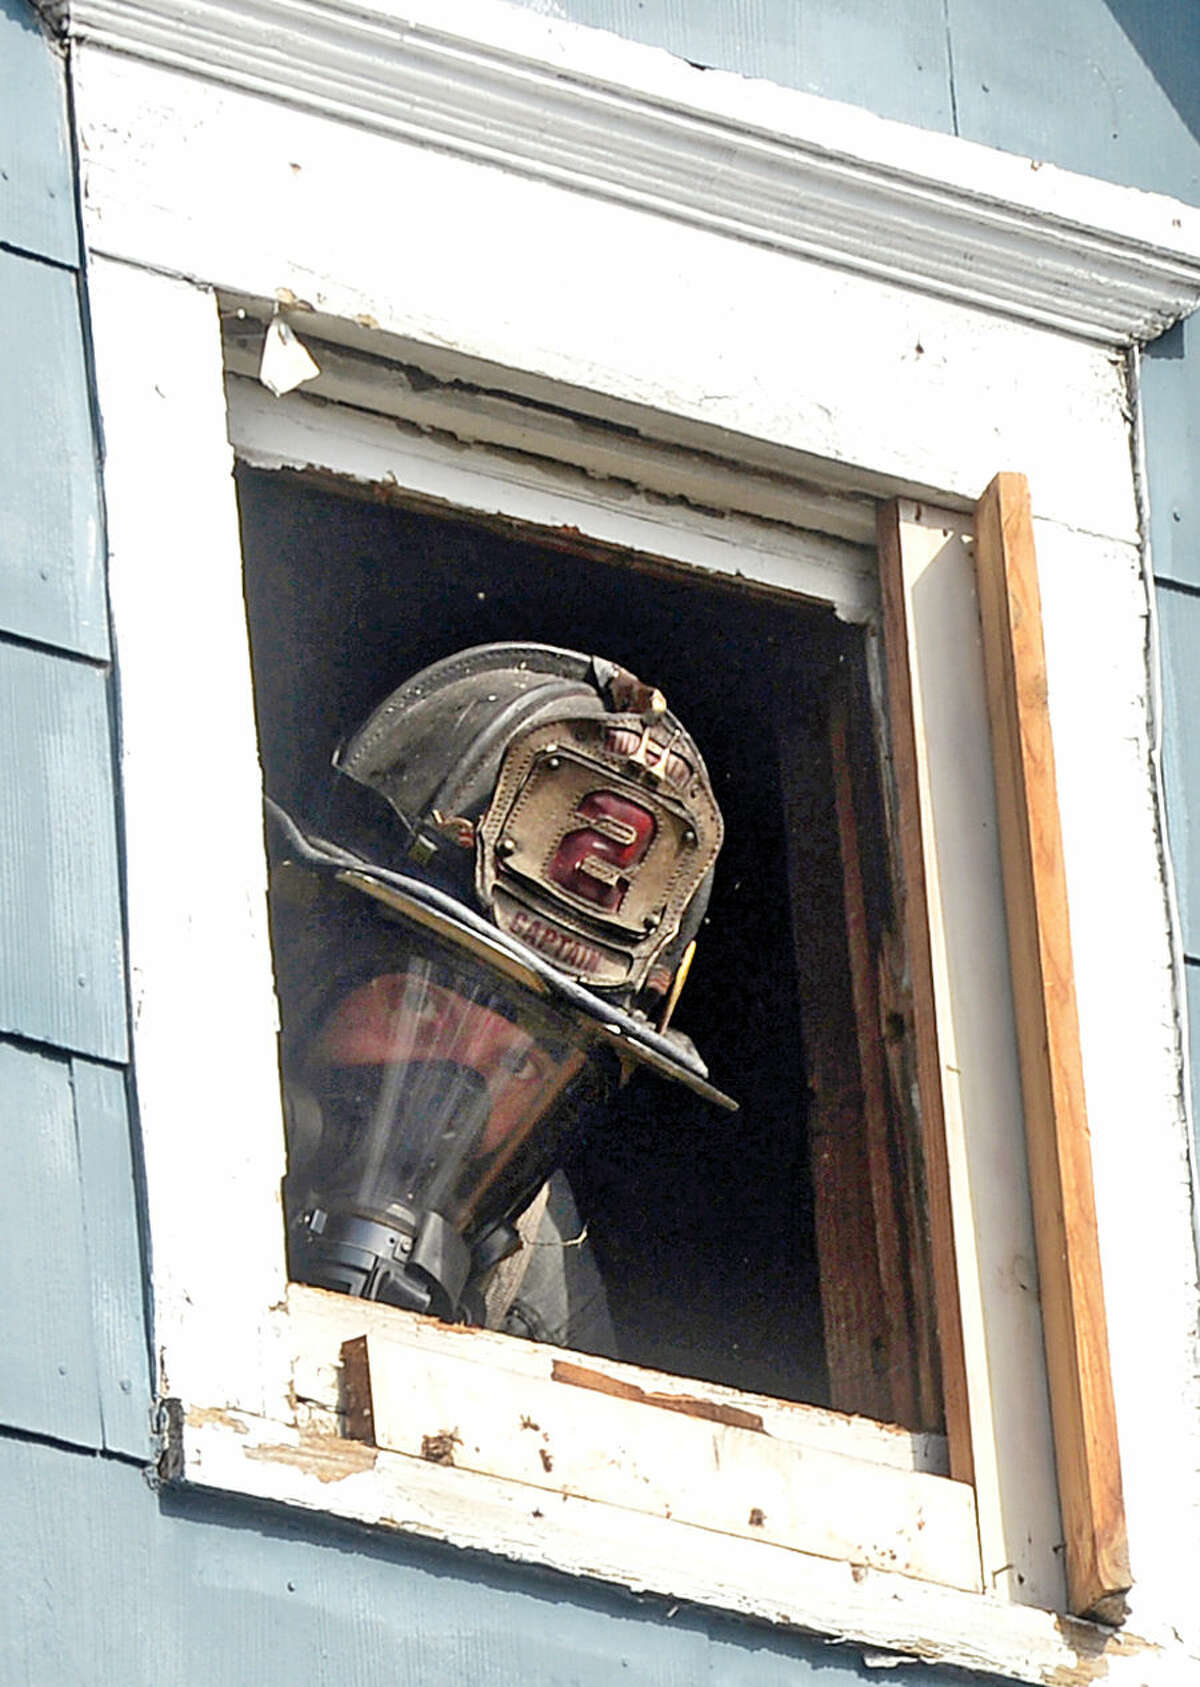 Hour photo / Erik Trautmann A Norwalk firefighter peers out of an attic window he vented while battling a fire that engulfed the rear deck of the home at 25 Leuvine Street in Norwalk Tuesday afternoon.